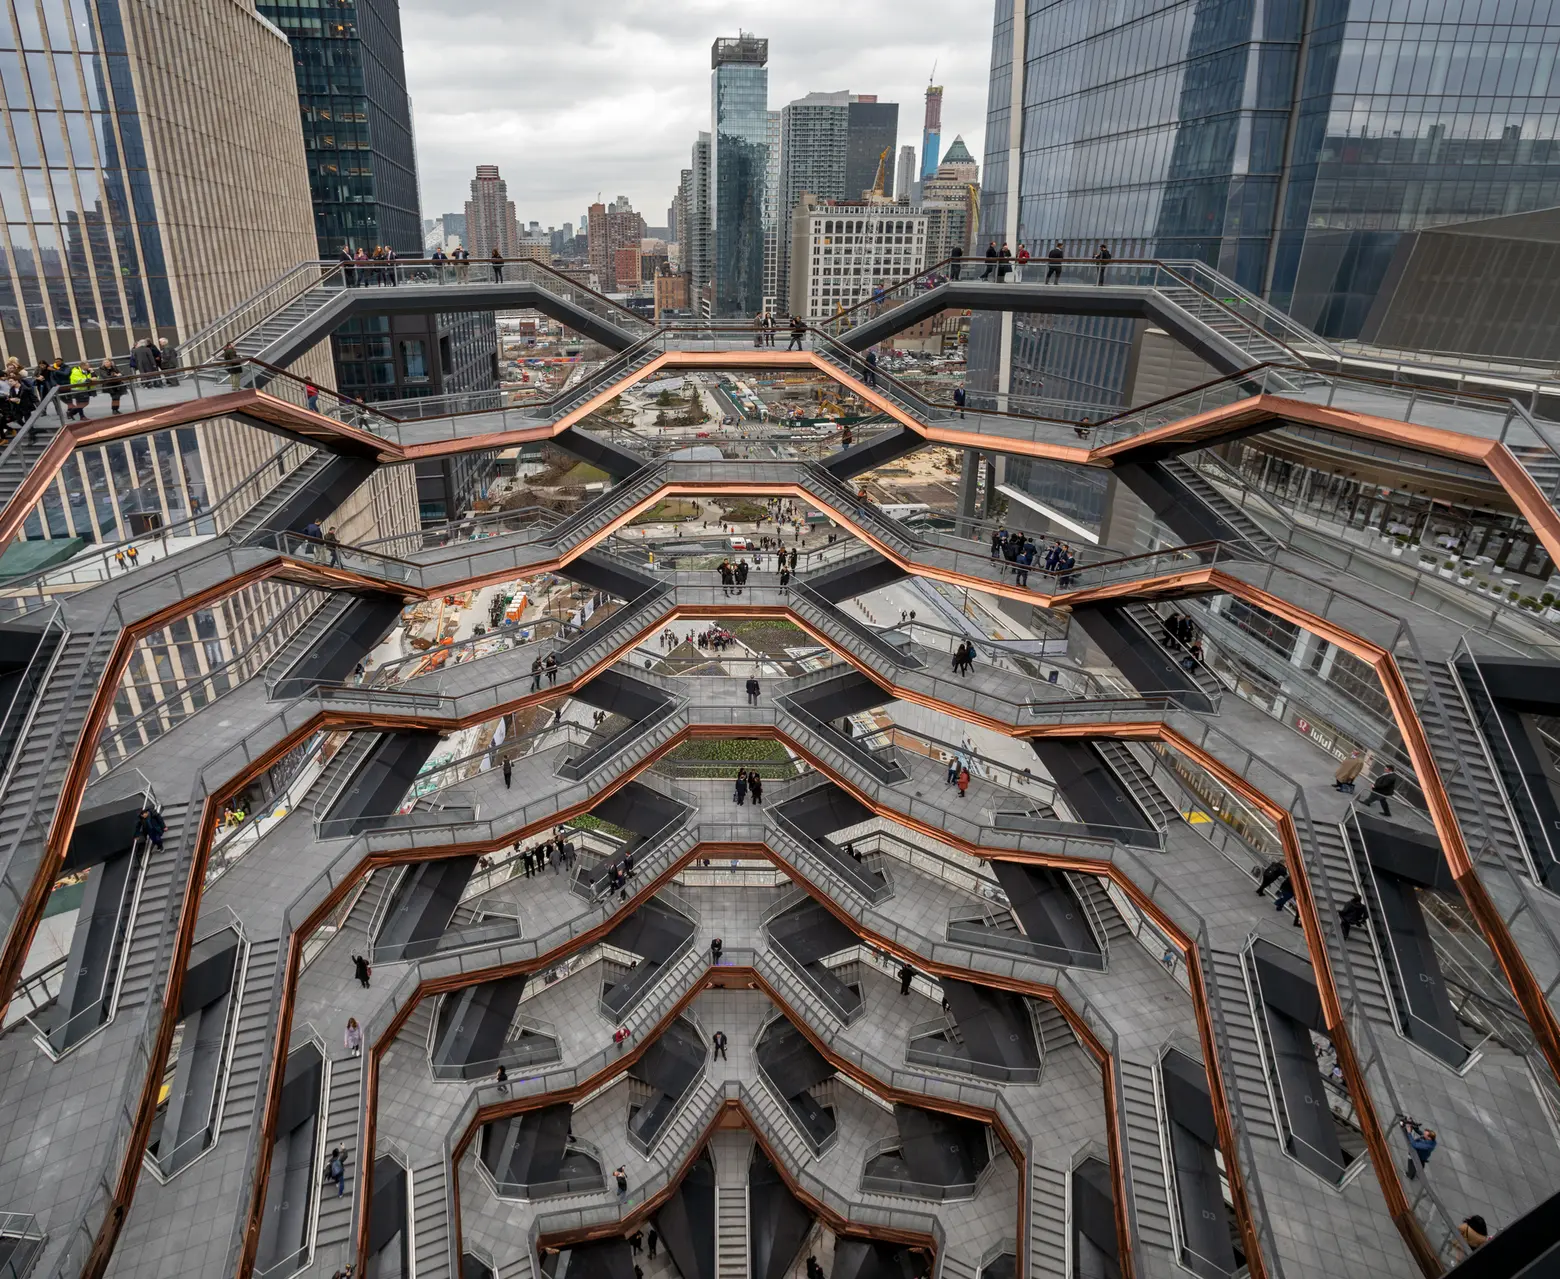 PHOTOS: See inside Hudson Yards’ climbable ‘Vessel’